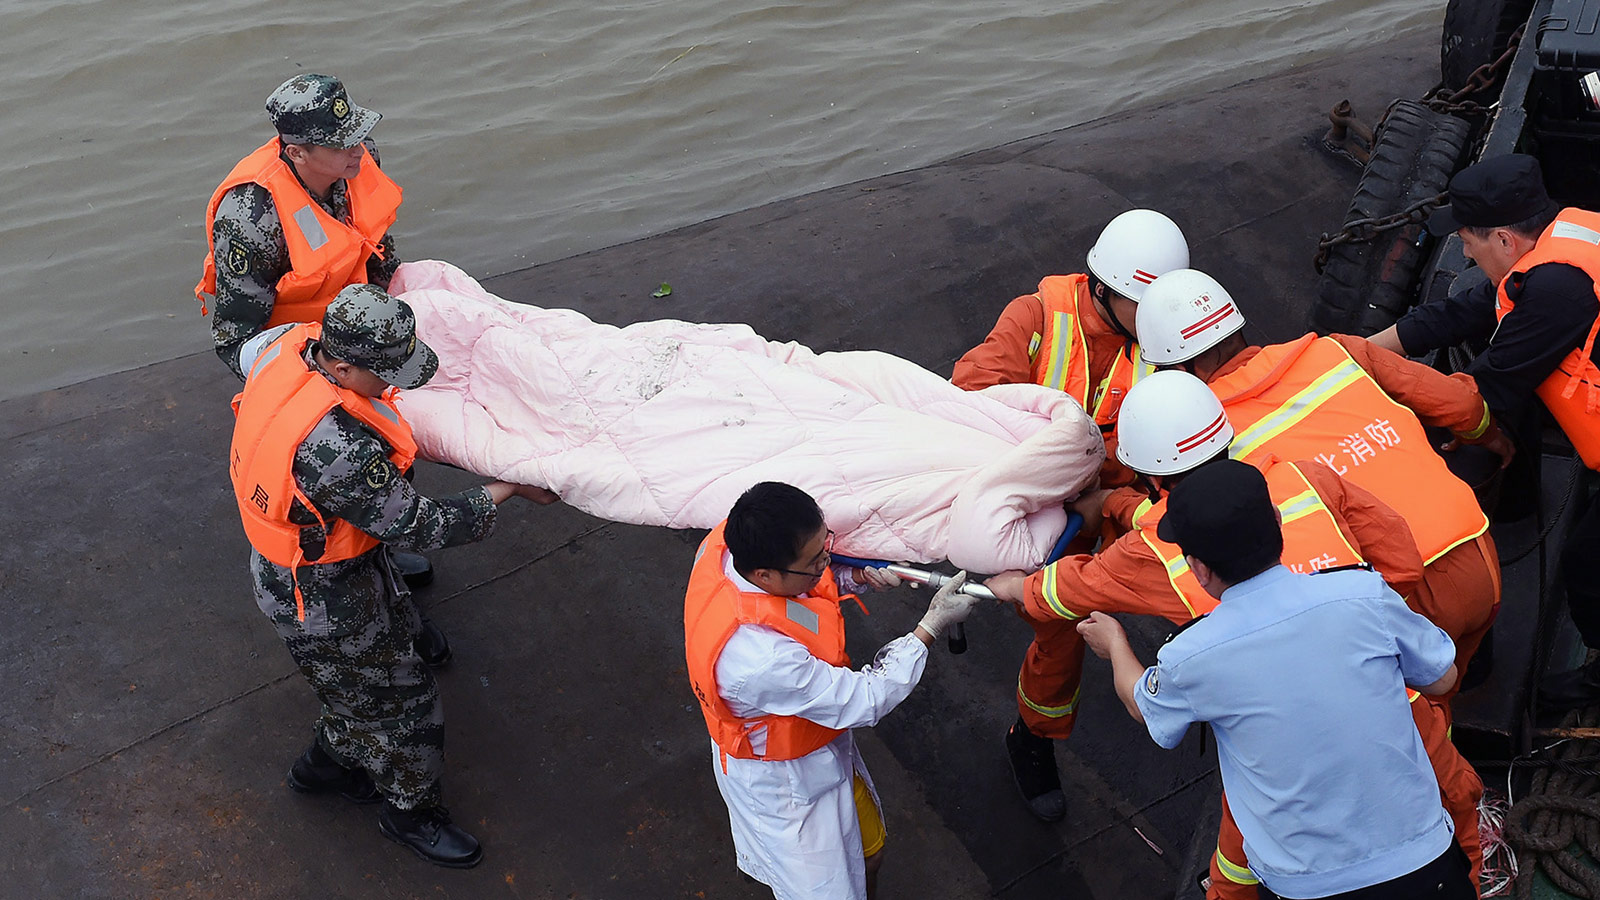 Death Toll Climbs to 97 as China Rights Capsized Ship - NBC News